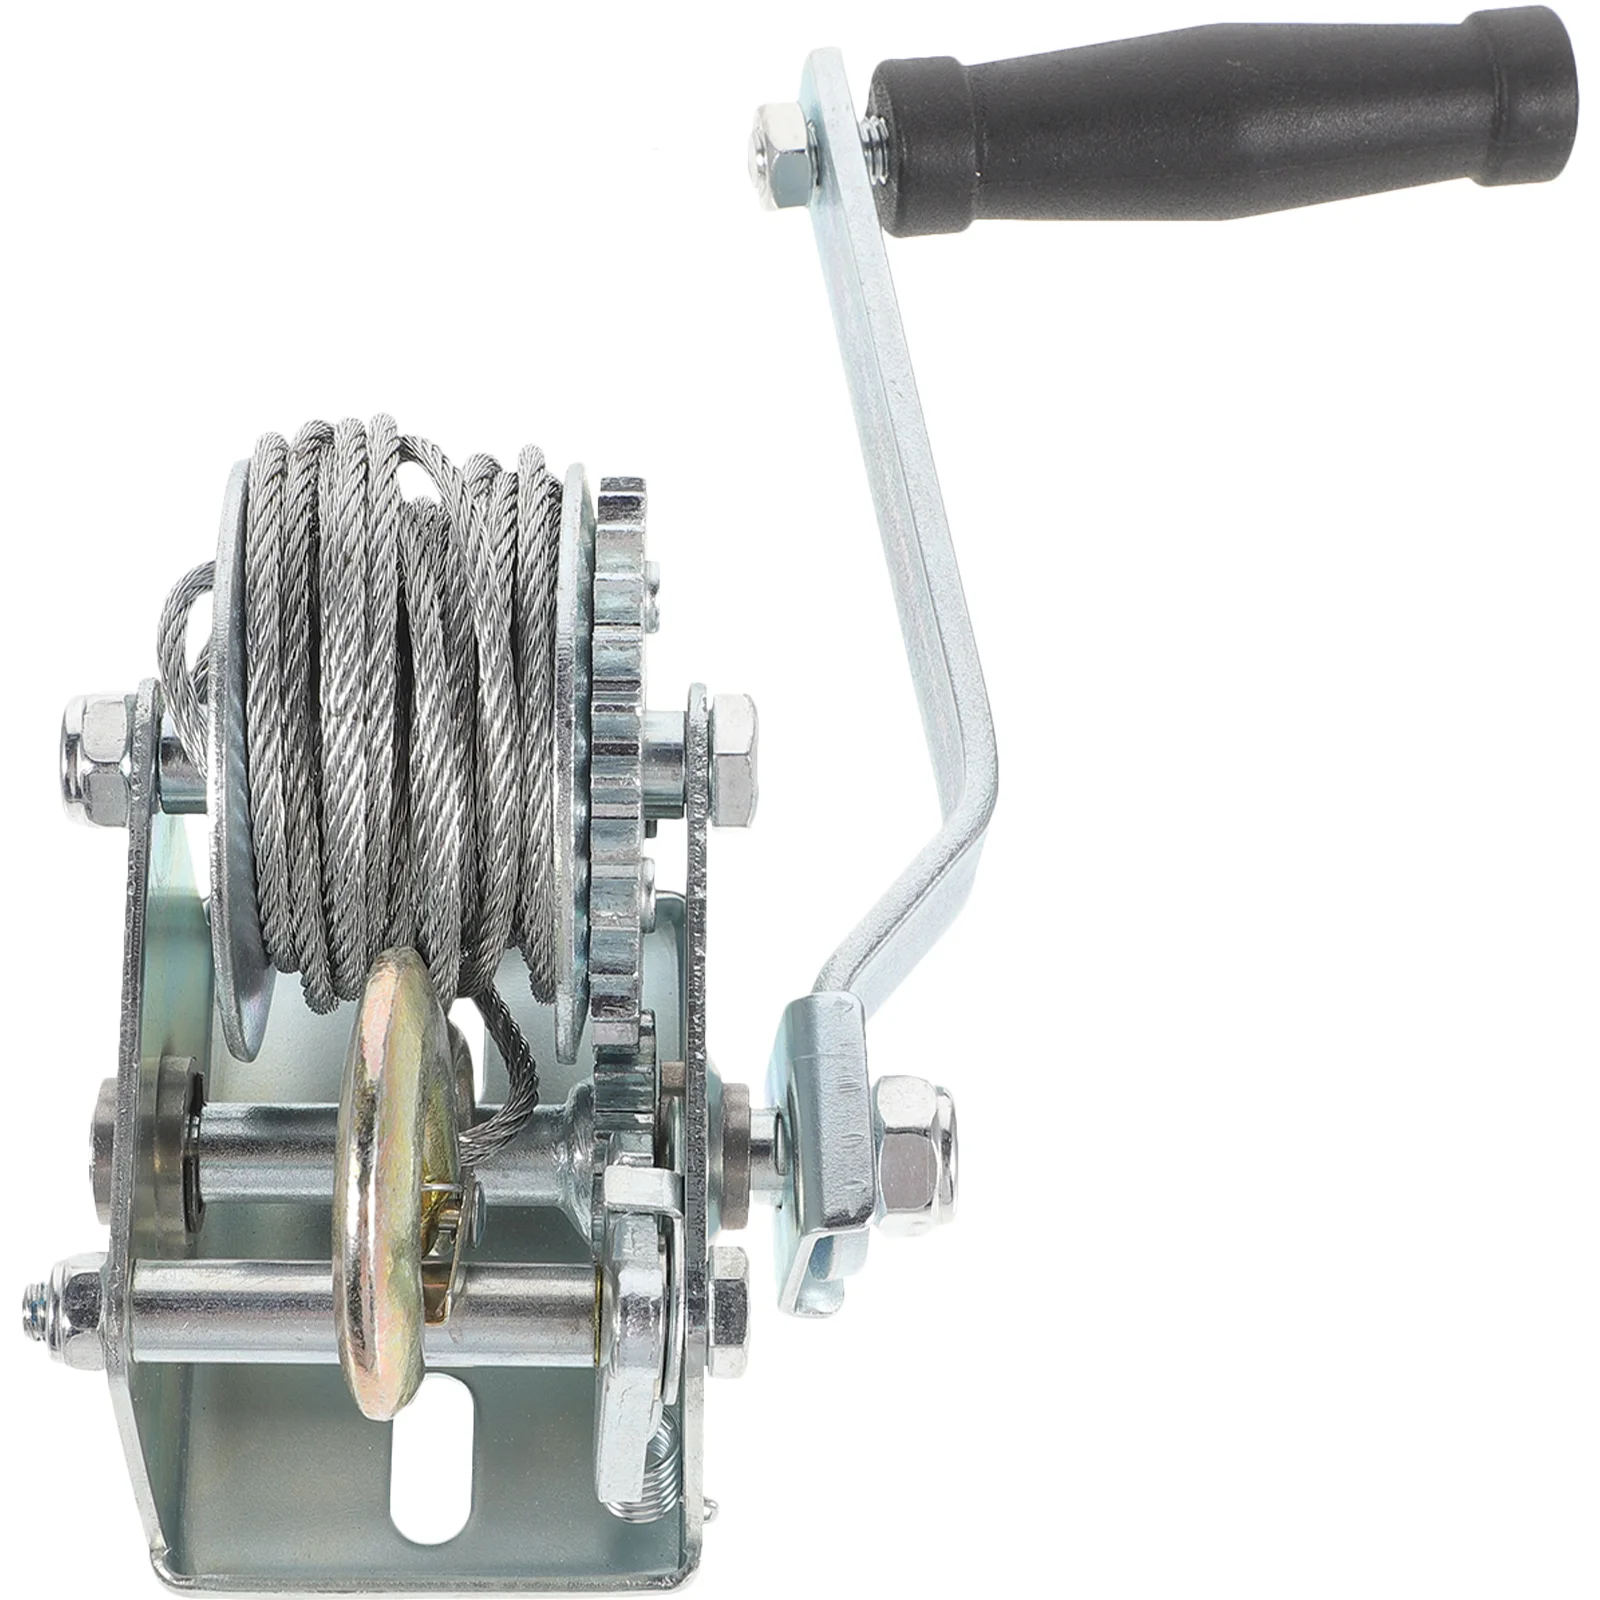 

Marine Manual Hand Winch Loading Boat Trailer Mini Wire Rope 500 Lb Metal 500lb Gear Crank Small Winches Hoist Squeaks